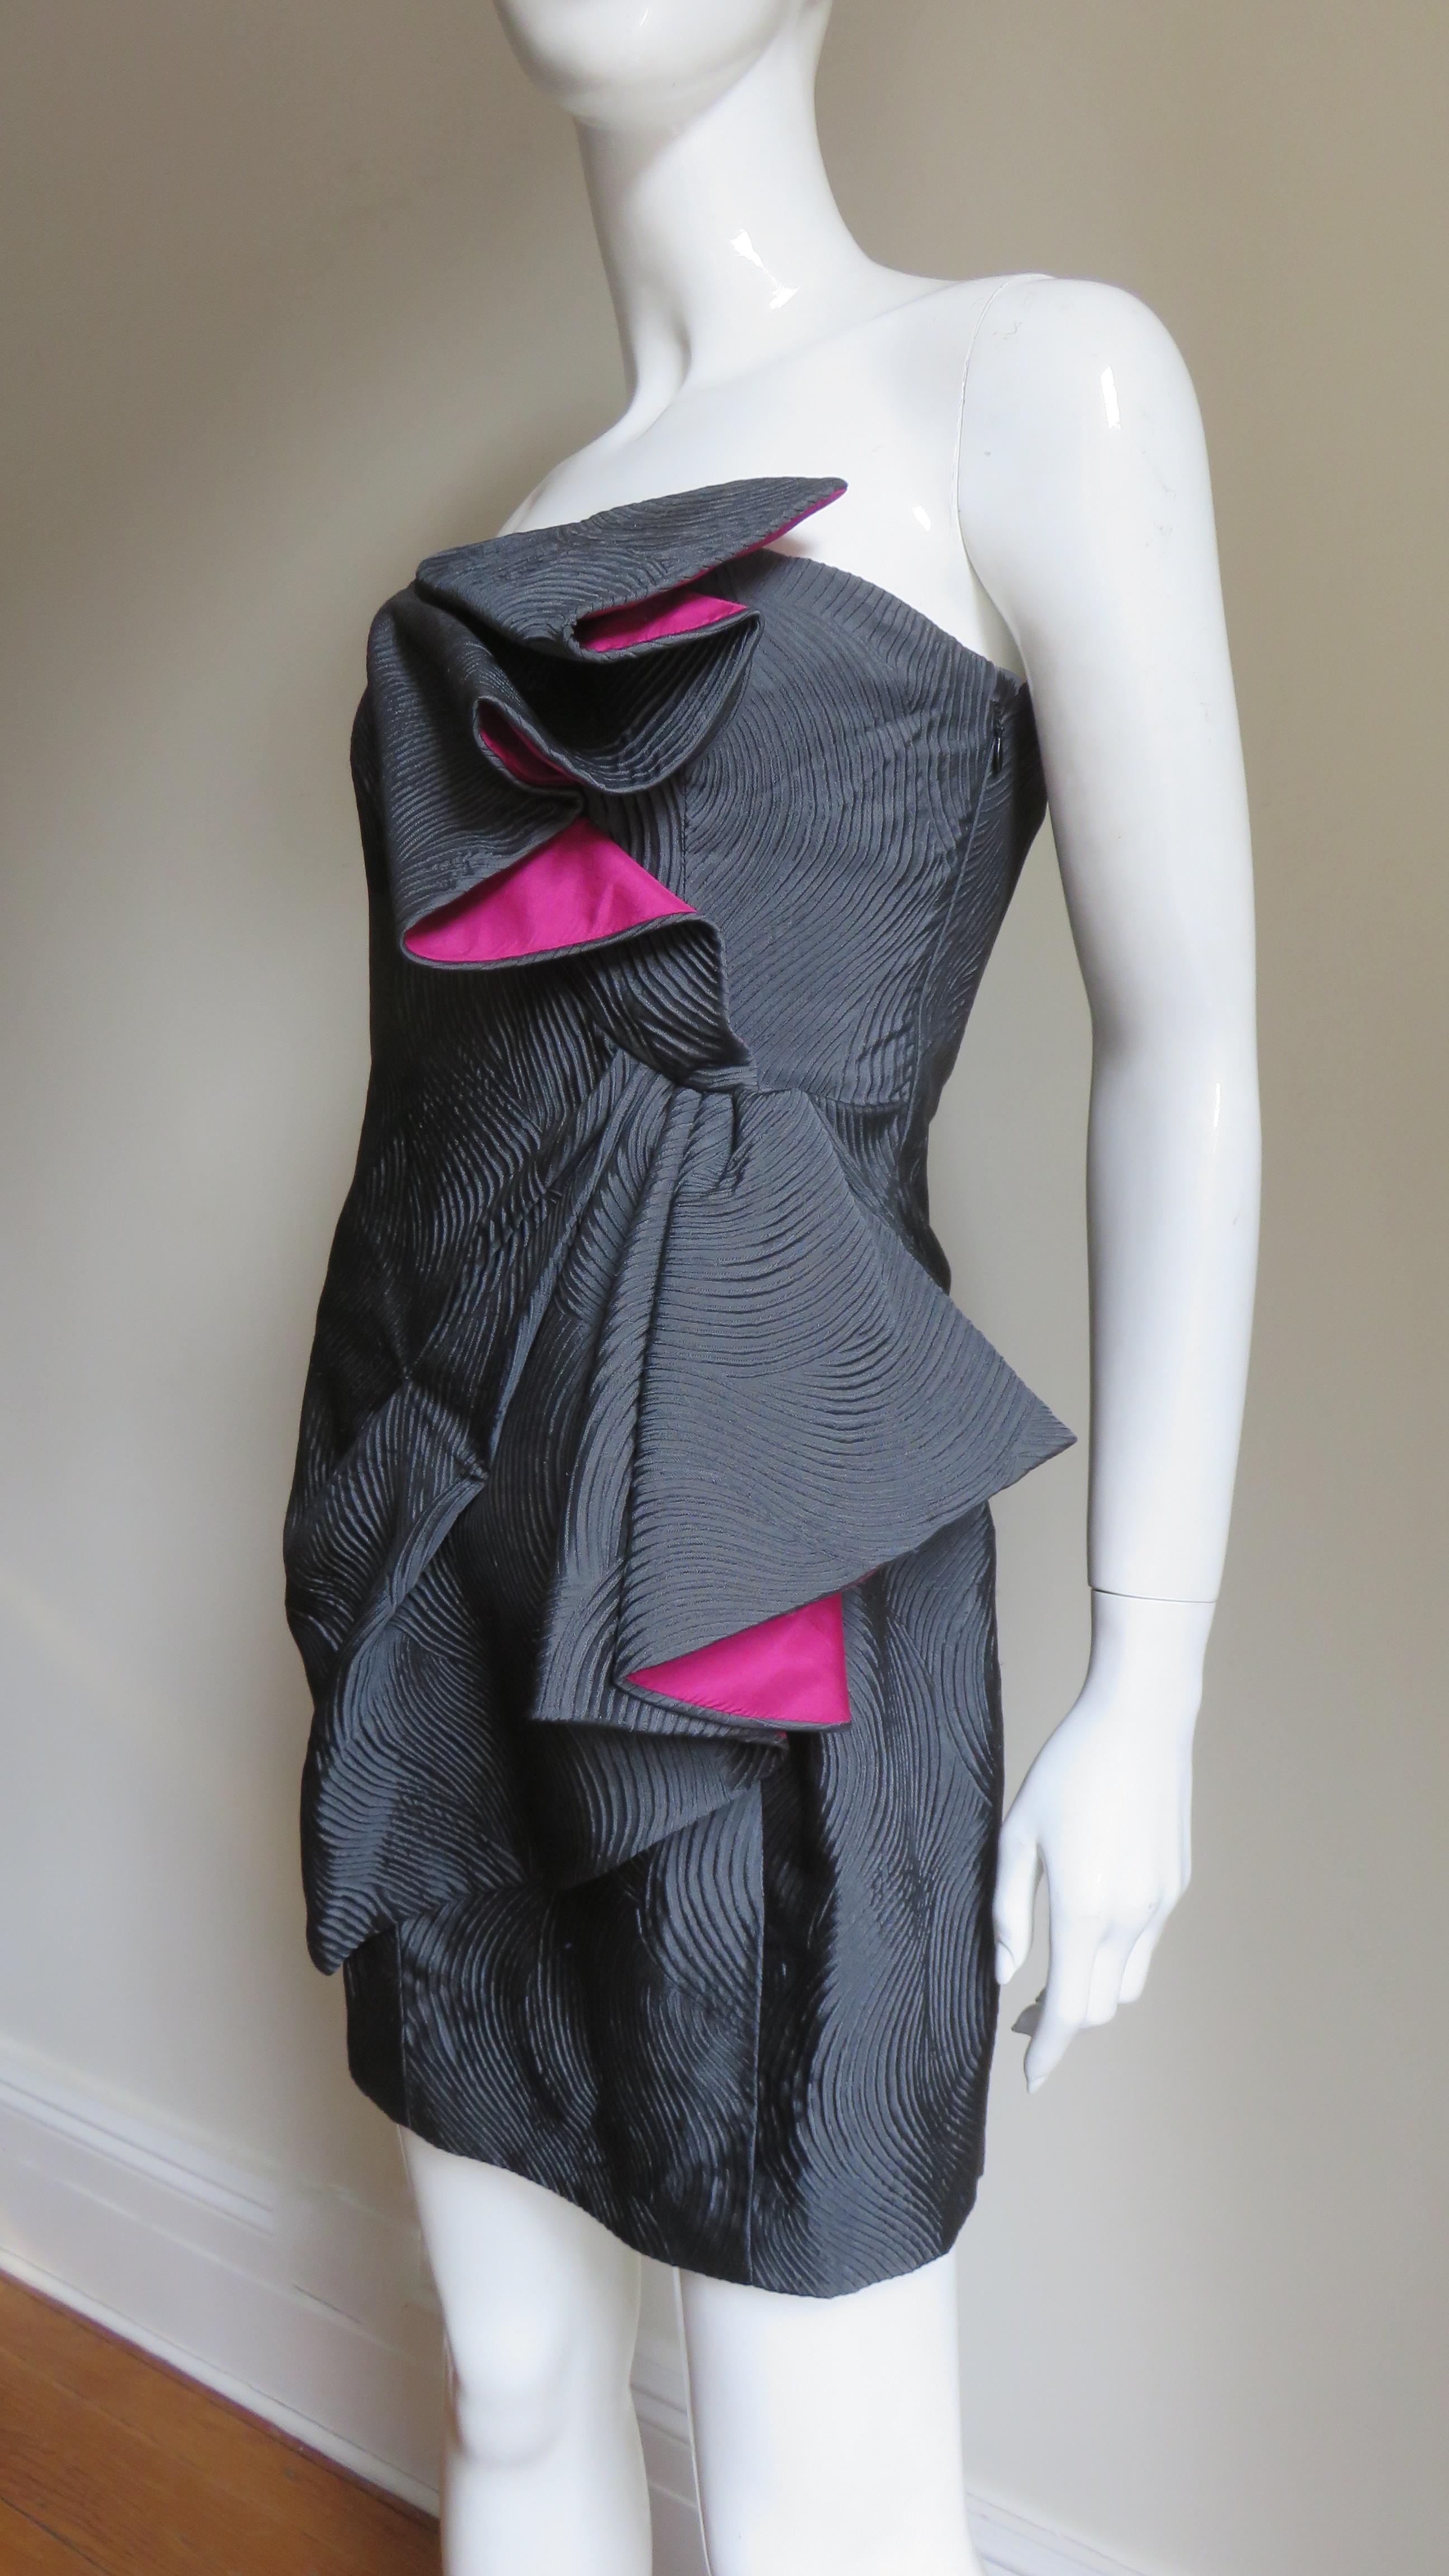 A gorgeous charcoal grey and bright pink silk dress from Emanuel Ungaro.  It is strapless with a diagonal folded front bodice panel with bright pink inside and another at the hip.  It has a side zipper and is lined in charcoal silk.
Fits sizes Extra